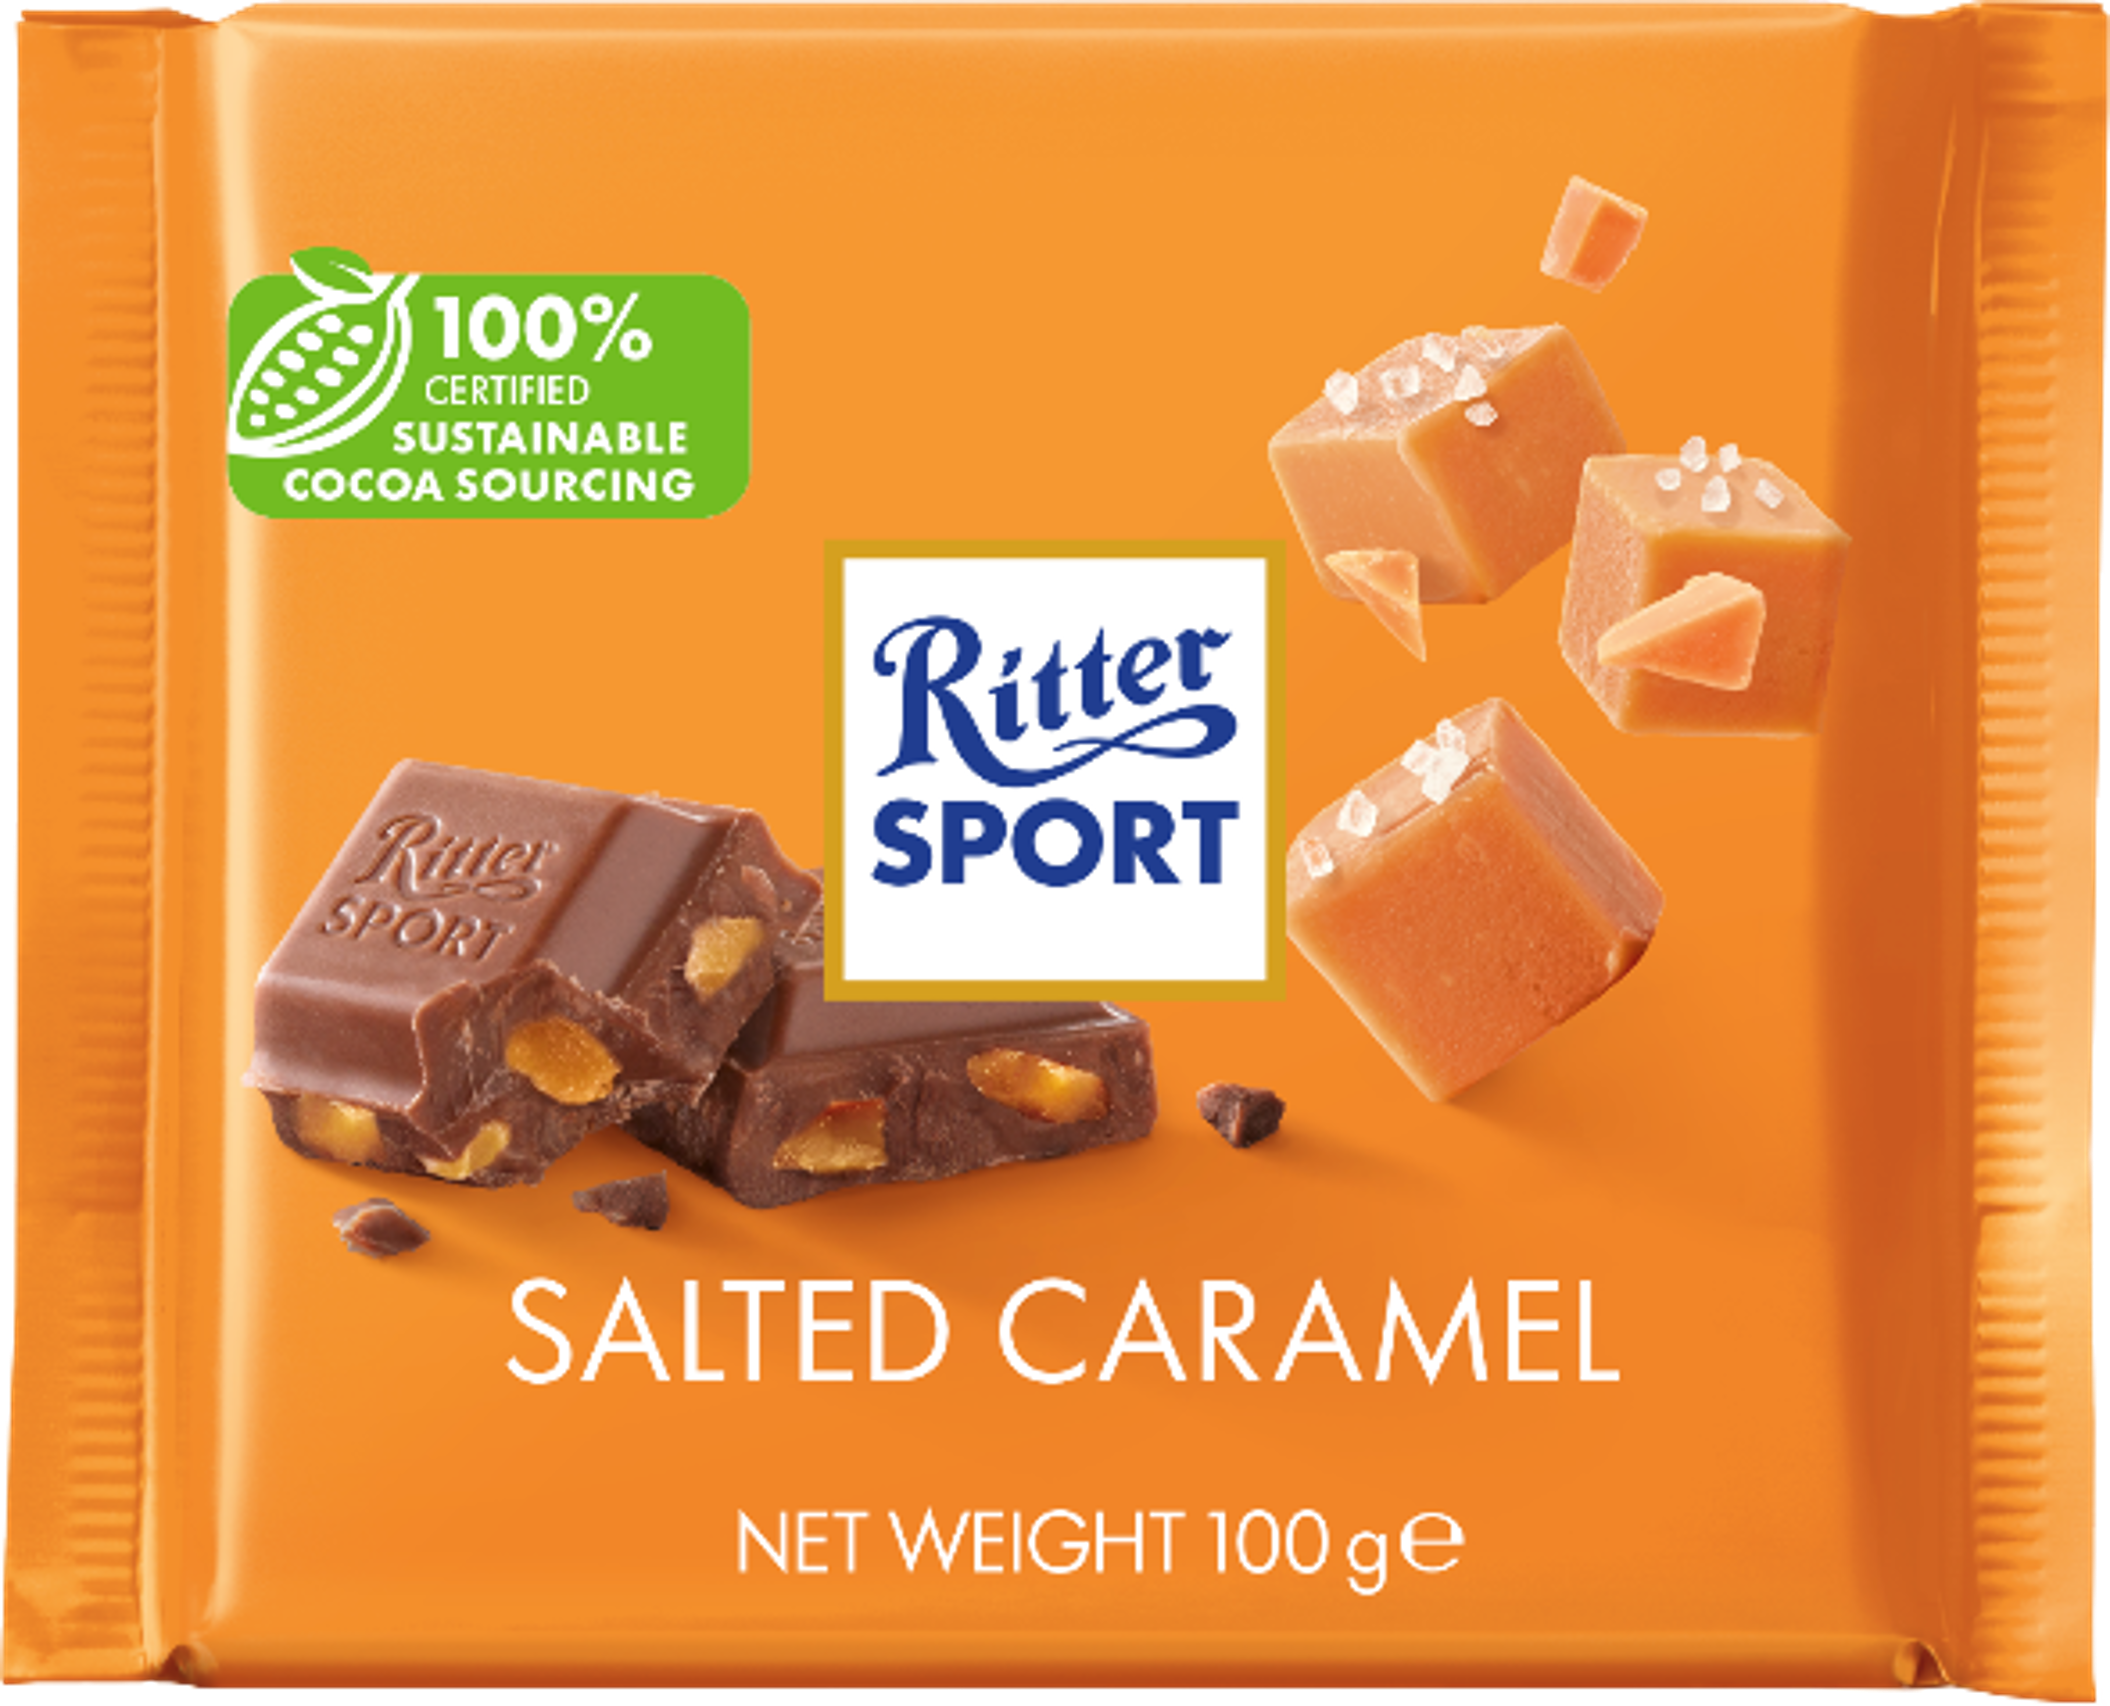 Ritter Sport launches new Salted Caramel and Orange bars